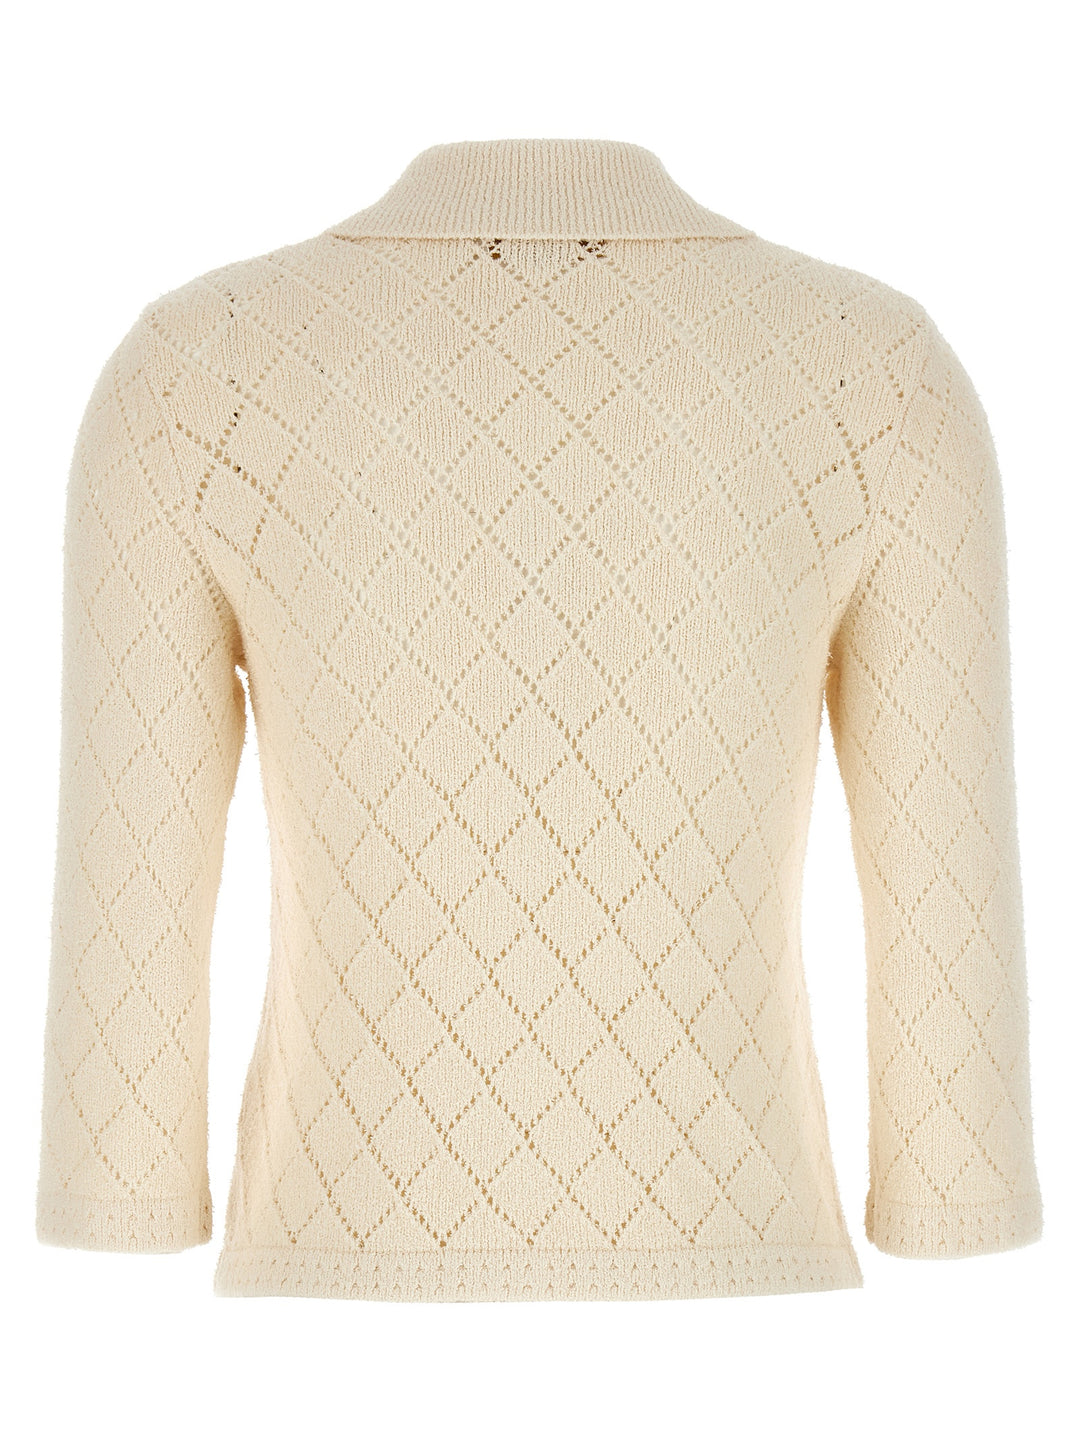 Matchmaker Pointelle Polo Top Maglioni Bianco